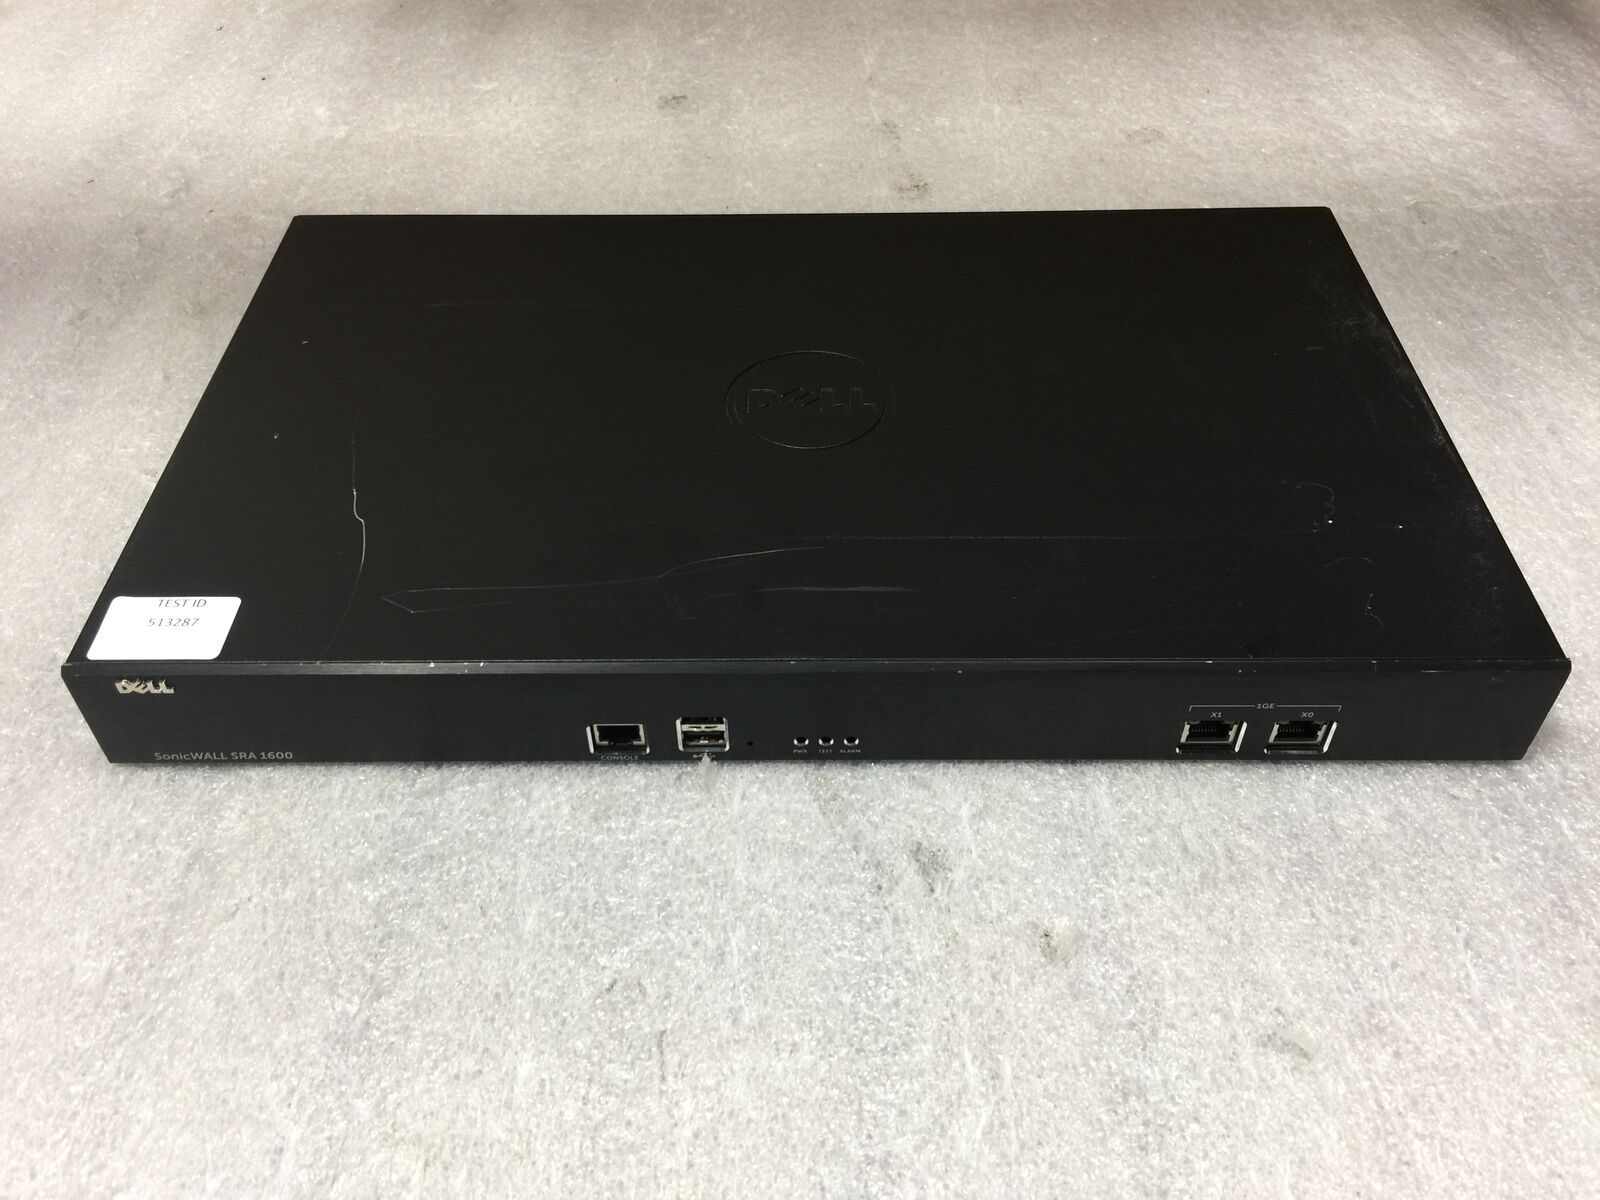 Dell SonicWALL SRA 1600 Network Security Appliance Firewall, Tested and Working